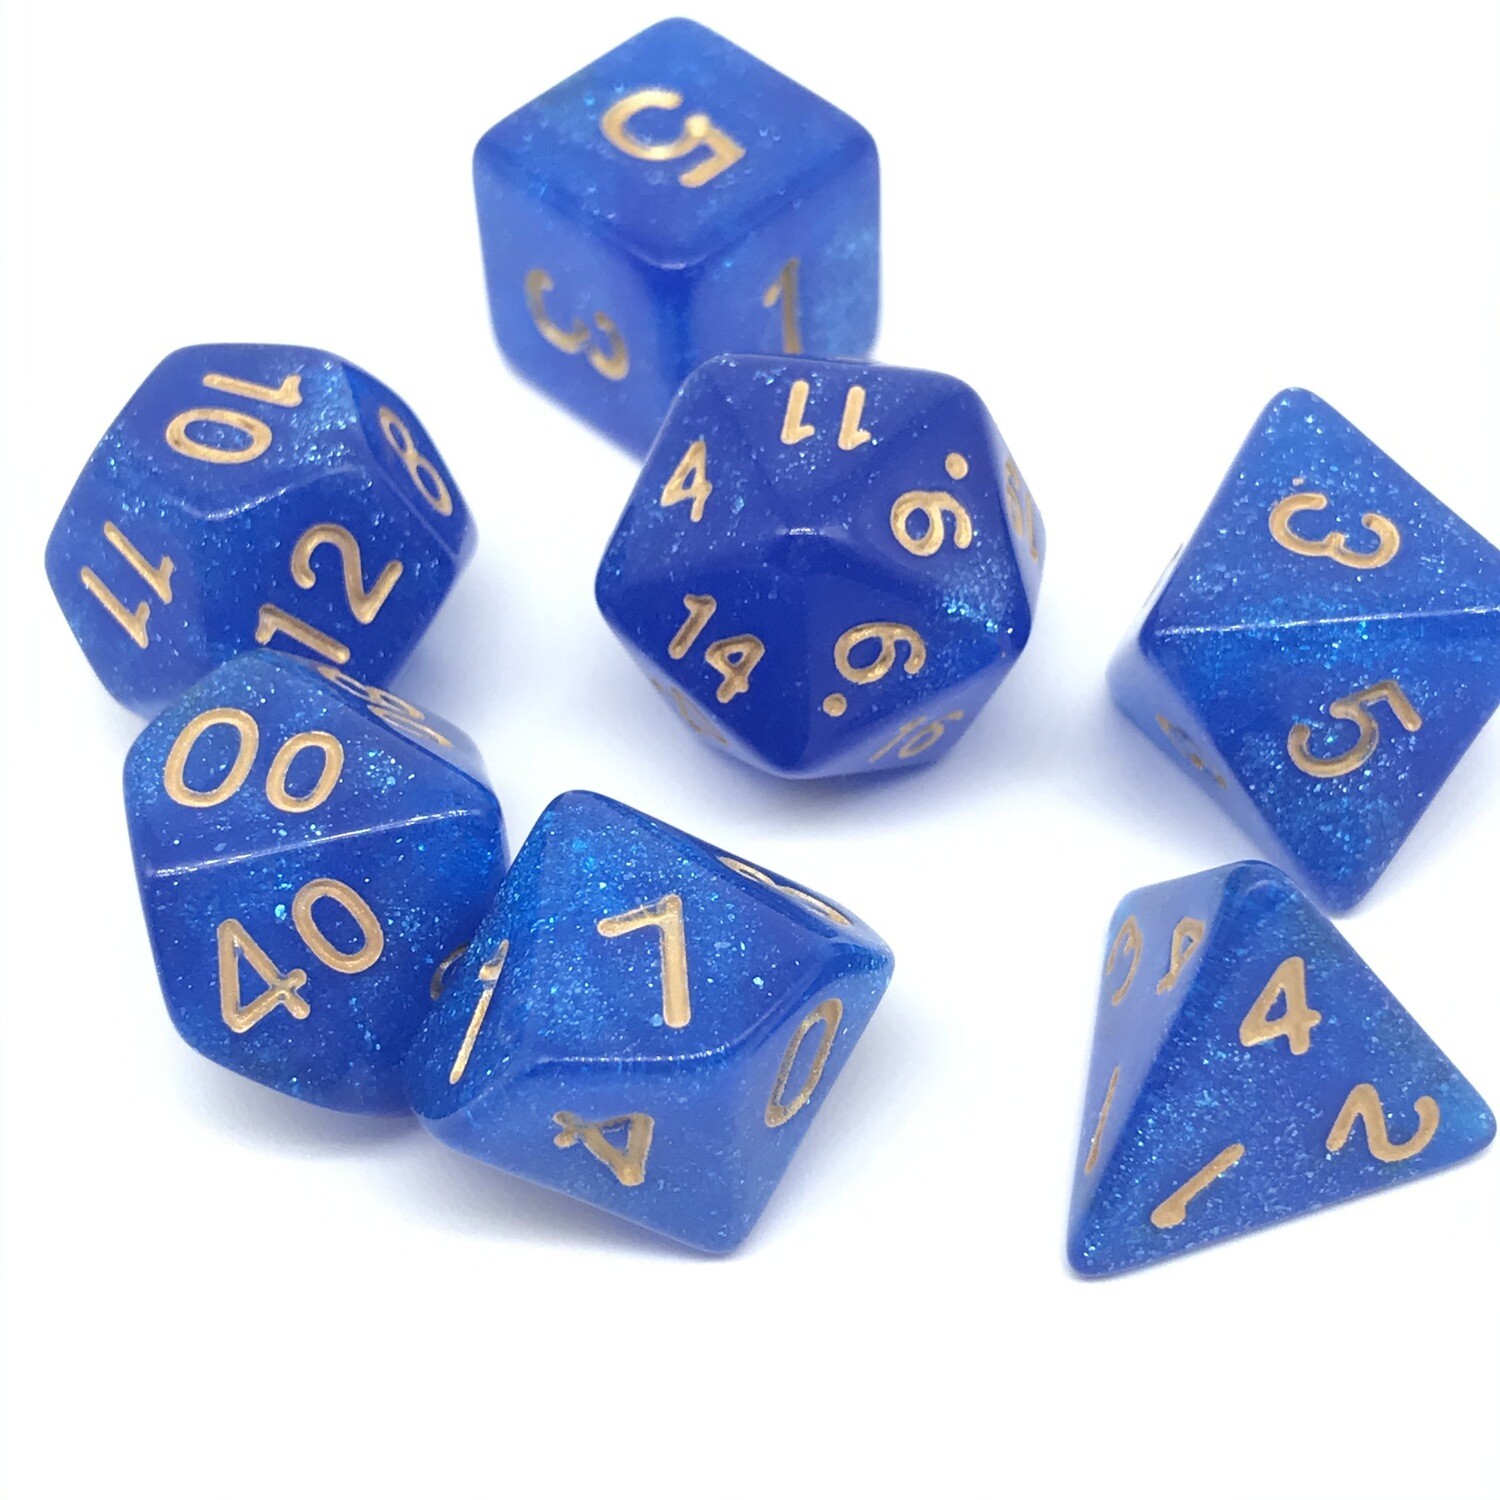 Dice Set - Blue sparkly with gold numbers